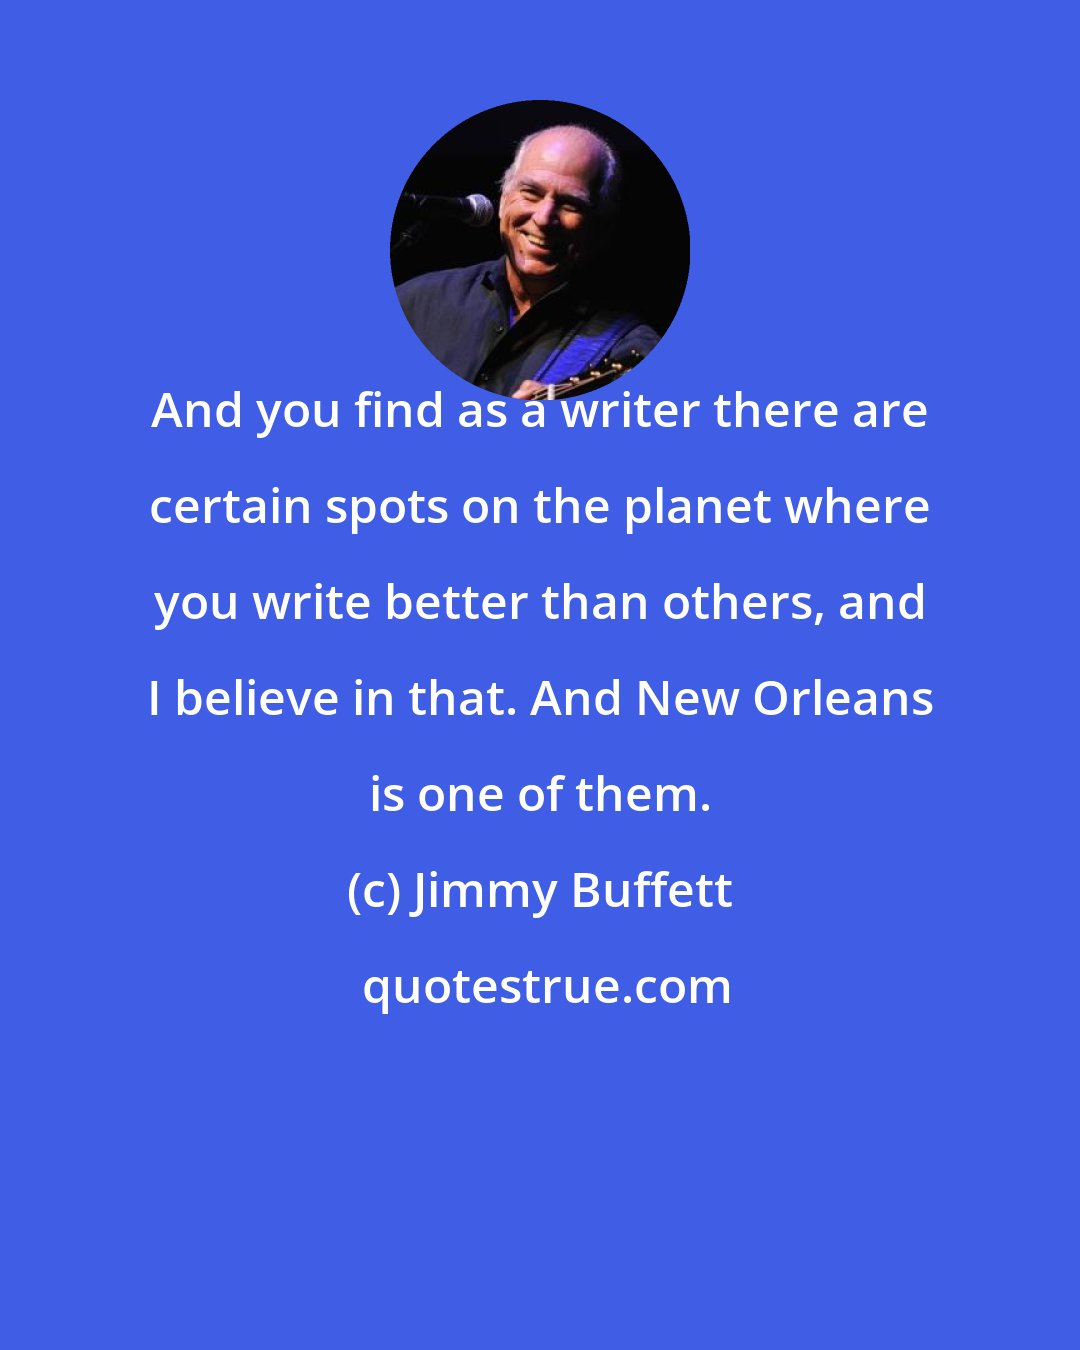 Jimmy Buffett: And you find as a writer there are certain spots on the planet where you write better than others, and I believe in that. And New Orleans is one of them.